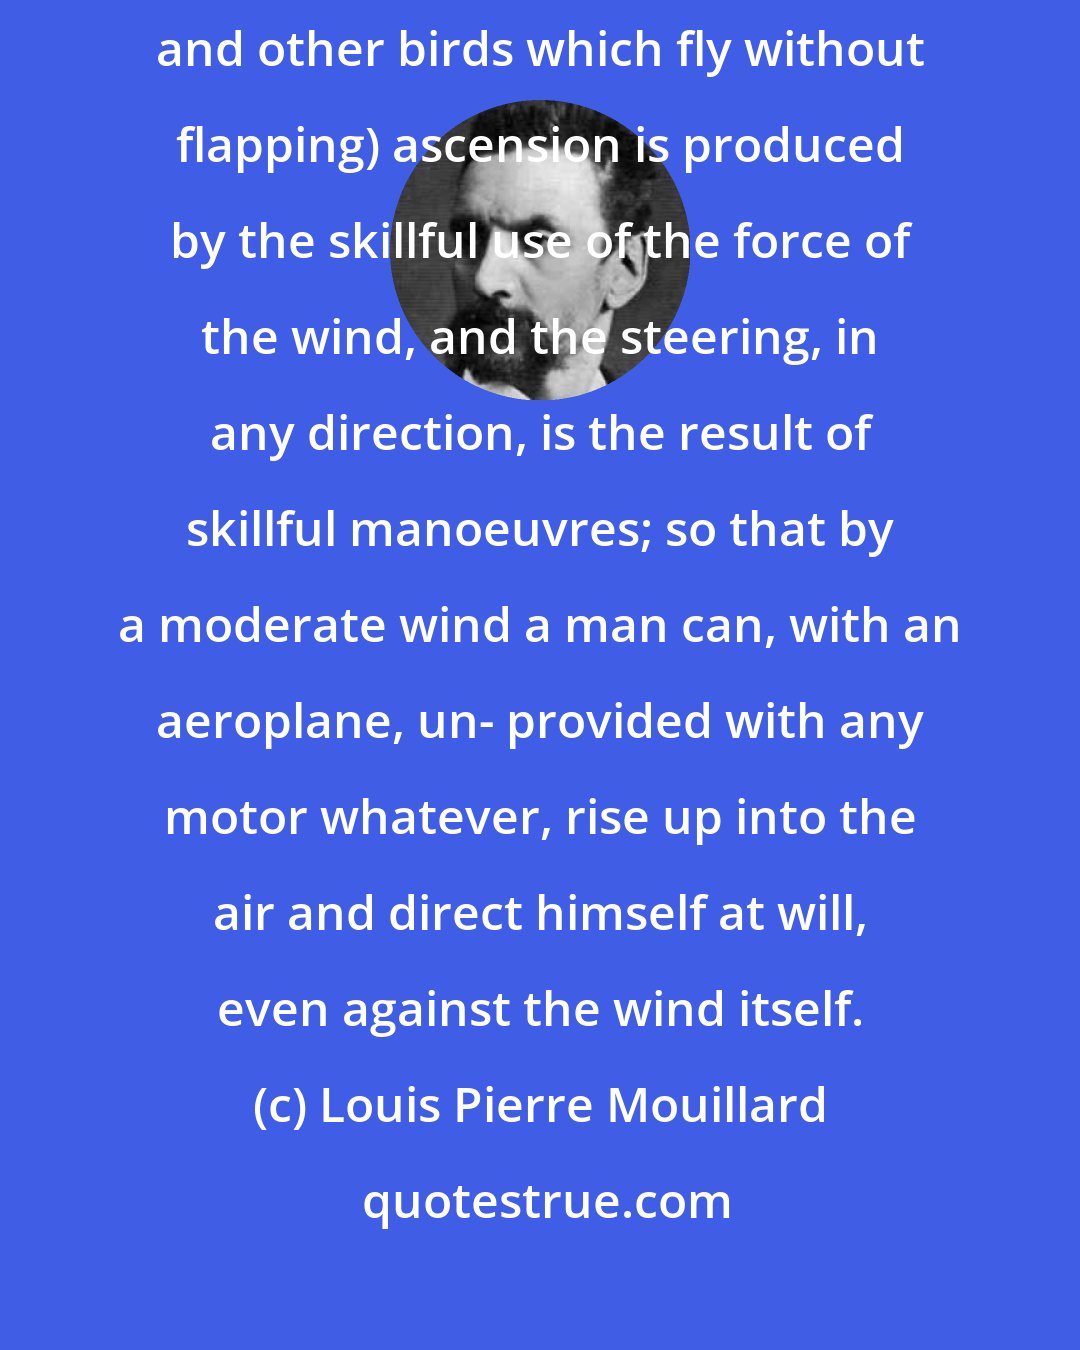 Louis Pierre Mouillard: I hold that in the flight of the soaring birds (the vultures, the eagles, and other birds which fly without flapping) ascension is produced by the skillful use of the force of the wind, and the steering, in any direction, is the result of skillful manoeuvres; so that by a moderate wind a man can, with an aeroplane, un- provided with any motor whatever, rise up into the air and direct himself at will, even against the wind itself.